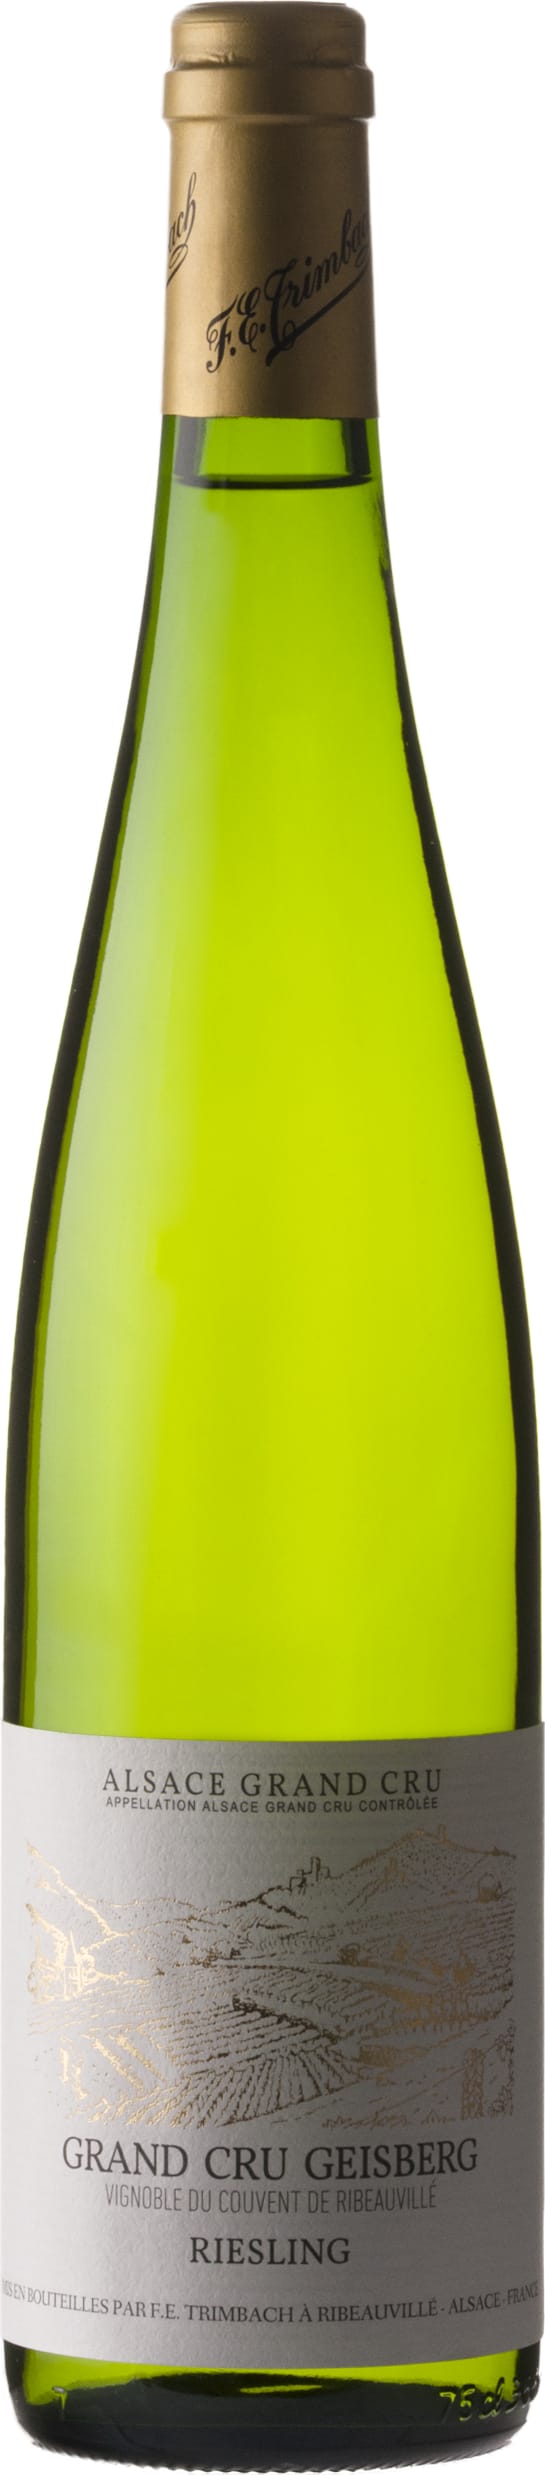 Trimbach Riesling Grand Cru Geisberg 2015 75cl - Buy Trimbach Wines from GREAT WINES DIRECT wine shop